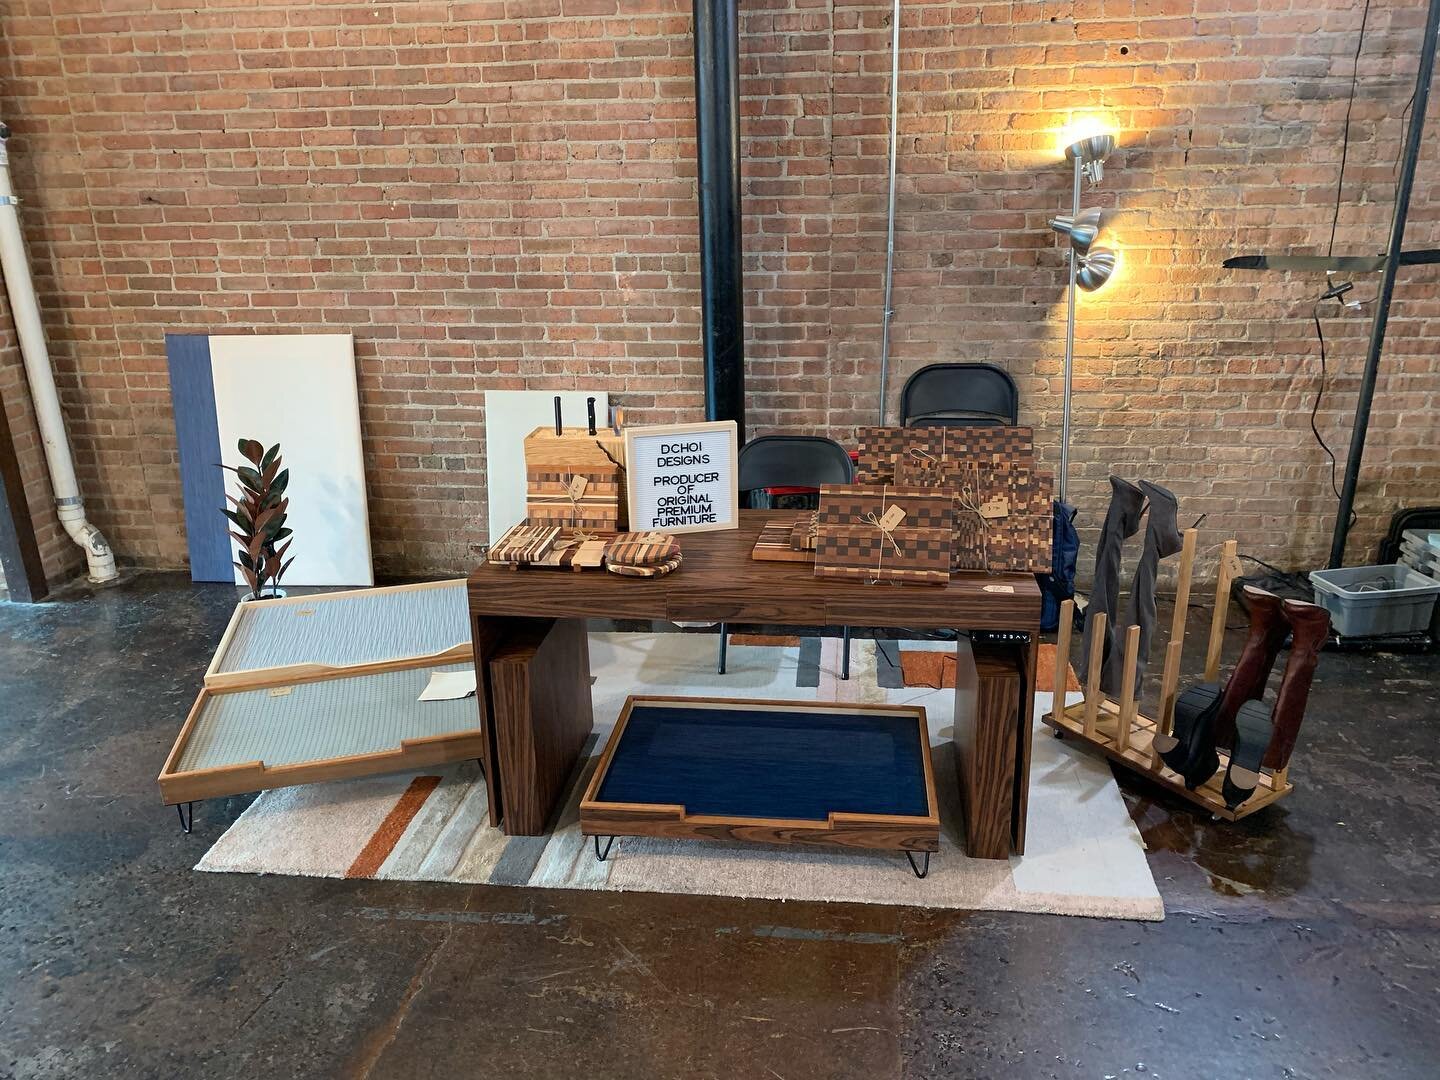 A big thank you to everyone that came out yesterday to show support and buy some custom goods at the @chicagoartisanmarket . It's always great to interact and receive positive feedback during these events! 

Don't forget to check out our new dog beds